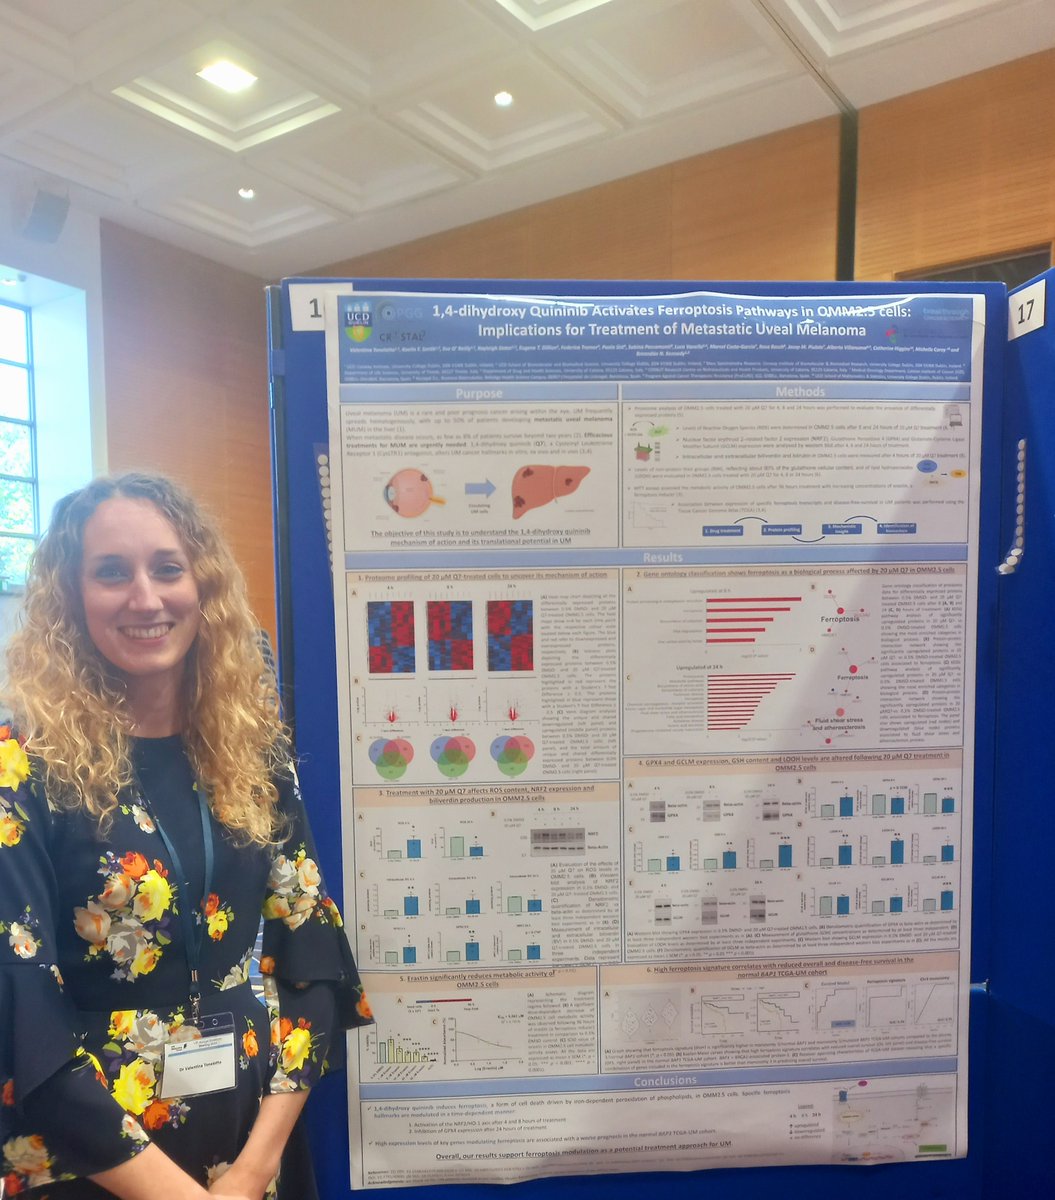 Glad to have presented our project '1,4-dihydroxy quininib activates ferroptosis pathways in OMM2.5 cells: implications for treatment of Metastatic Uveal Melanoma' and to have been awarded the best poster prize at the @irishmelanoma meeting. #Uveal_Melanoma #makemoresurvivors